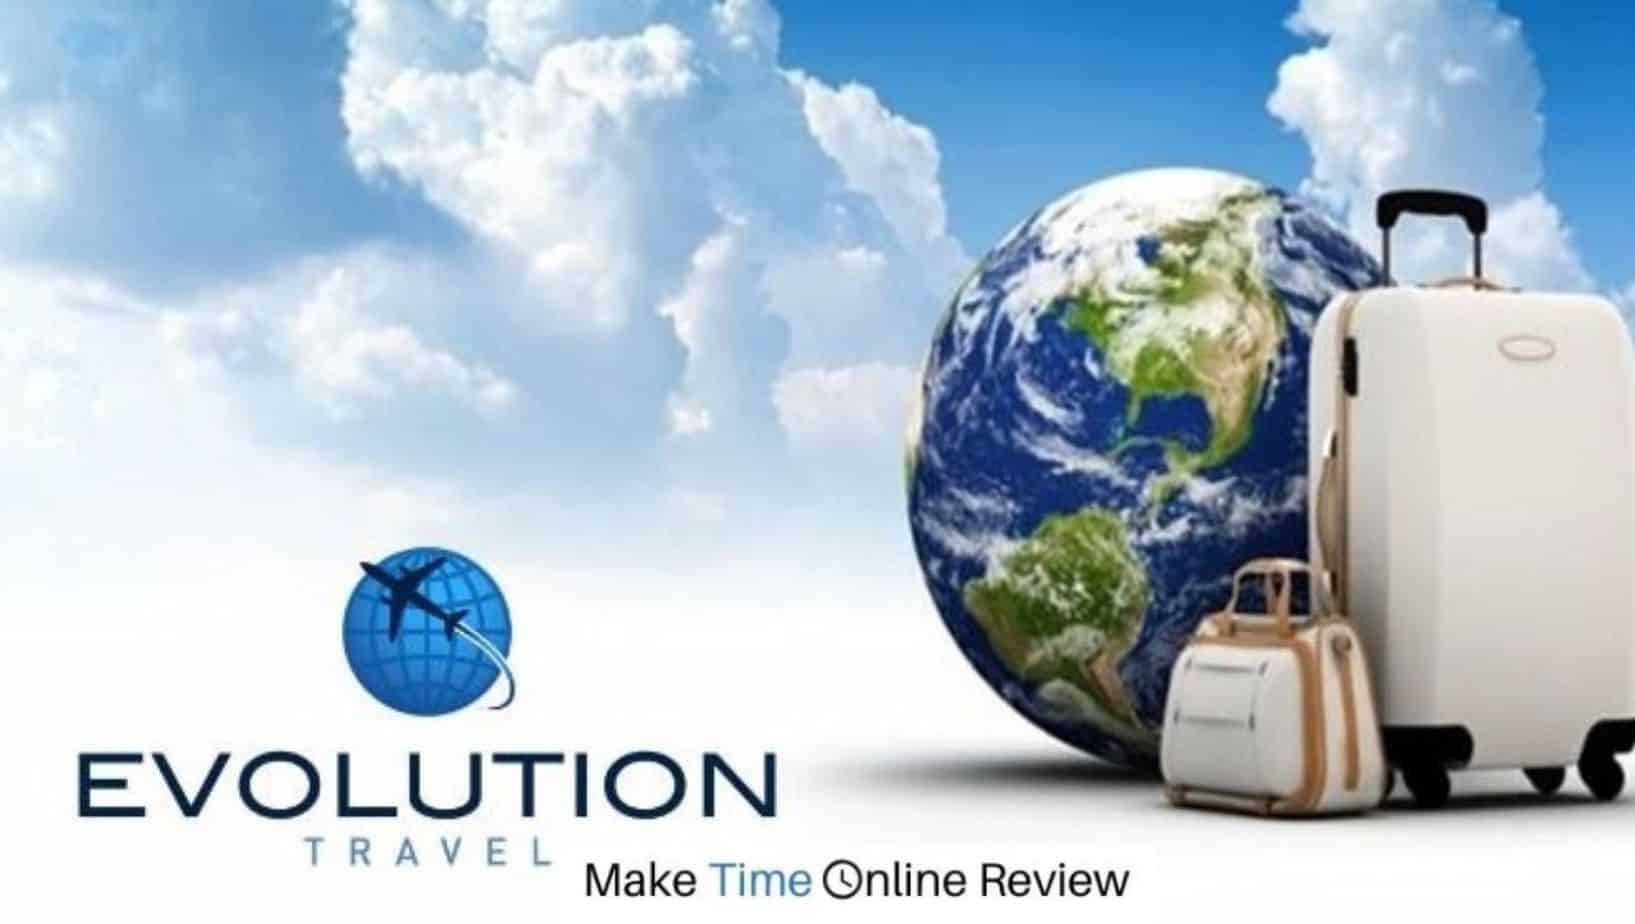 Is Evolution Travel a Scam? Dissecting the Facts Behind This MLM - Make